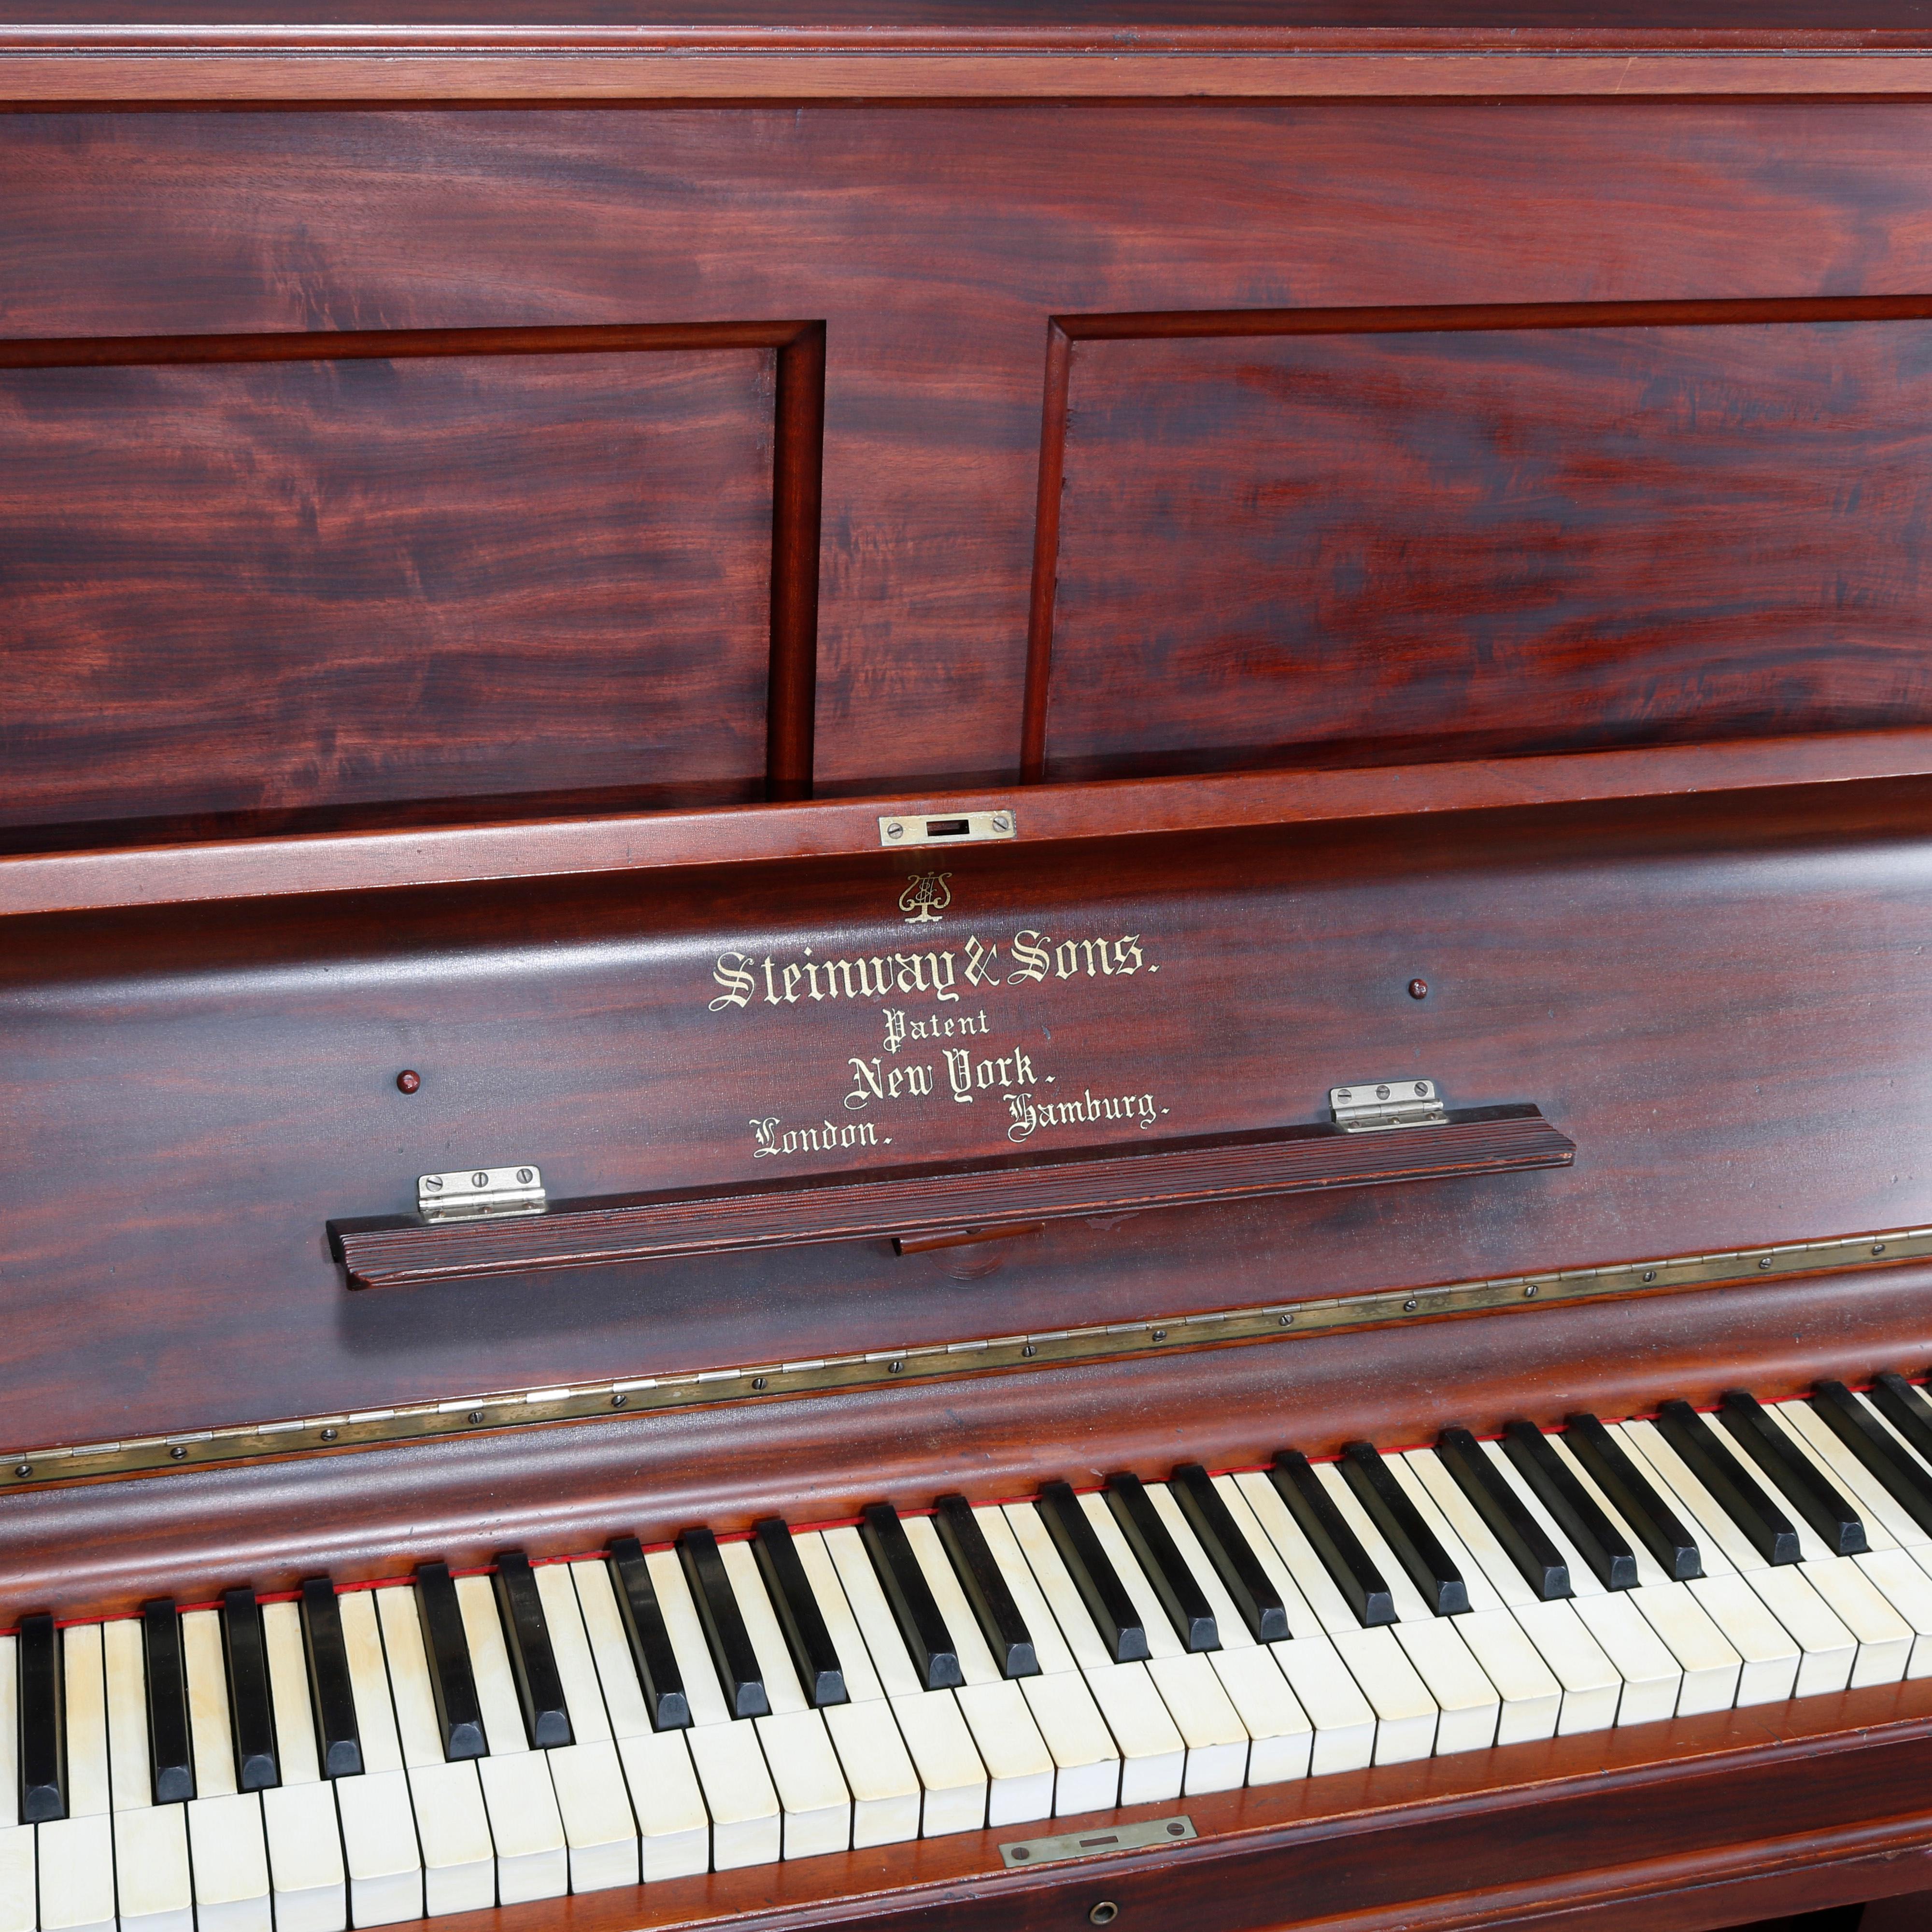 An antique upright grand piano by Steinway & Sons, New York offers a mahogany case with paneled face, balustrade supports, signed with serial #83215 as photographed, good soundboard and working, circa 1864.

Measures: 49.38